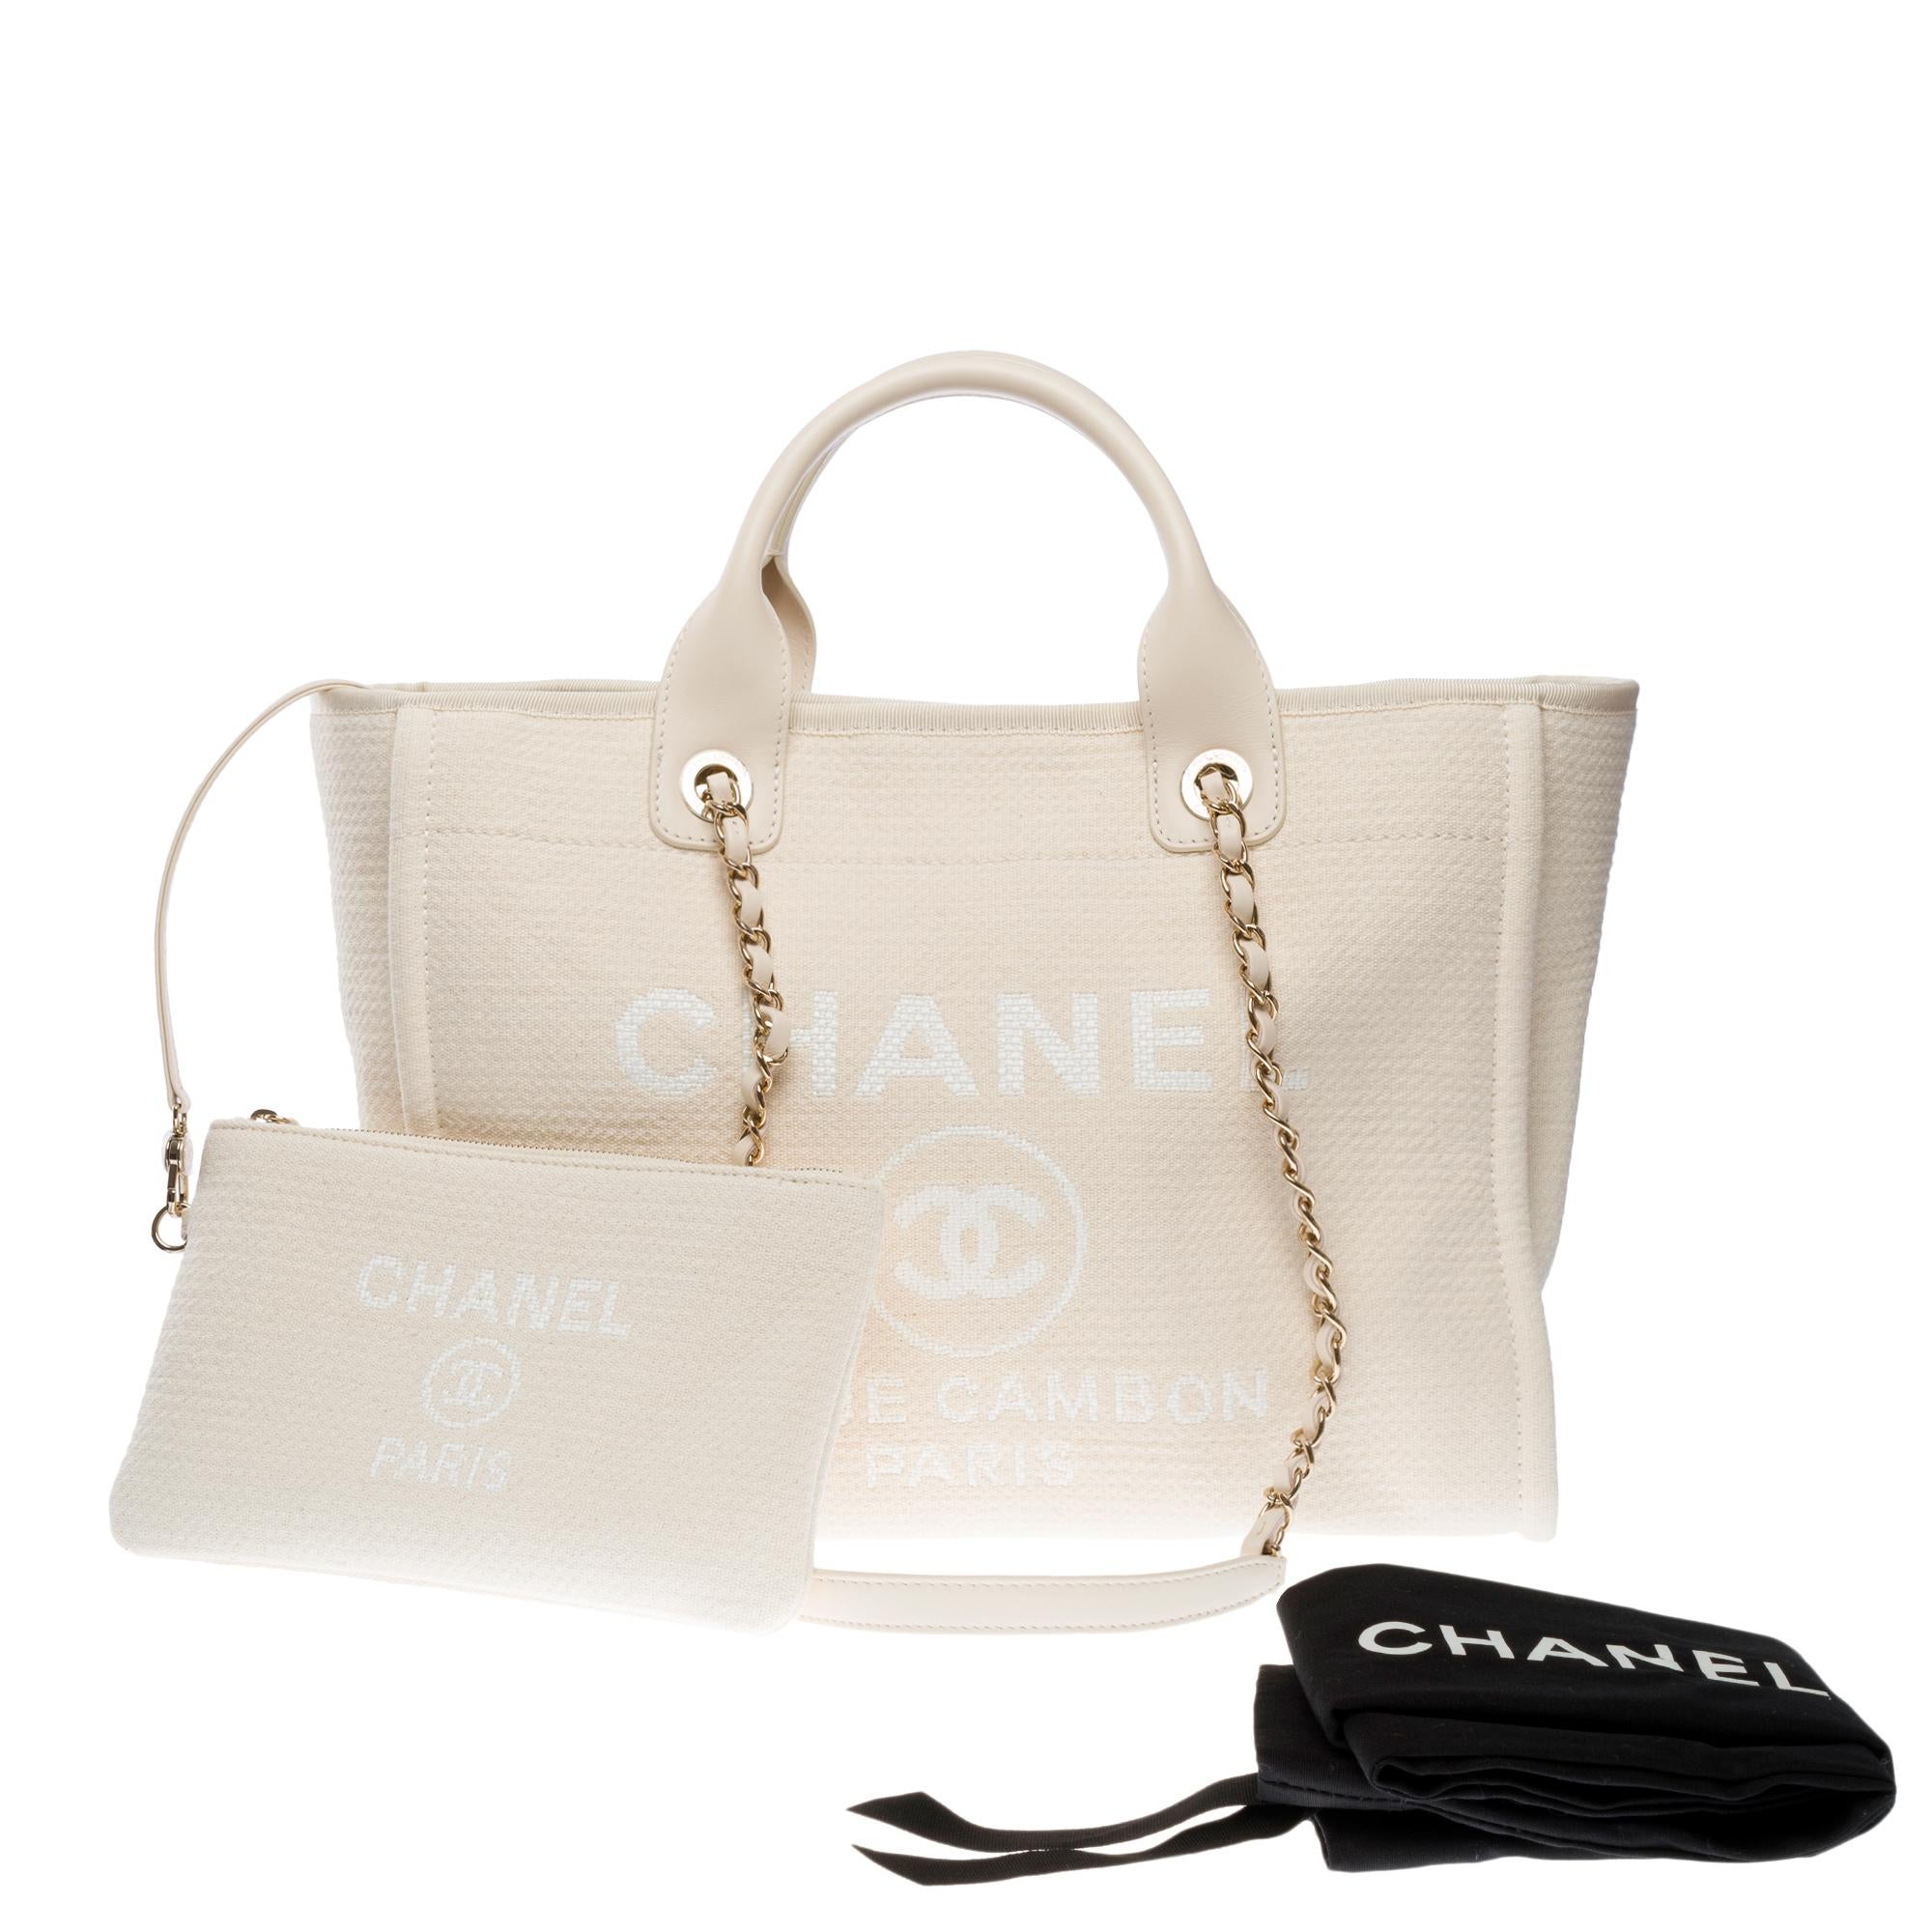 Amazing​ ​Chanel​ ​Deauville​ ​tote​ ​bag​ ​in​ off white​ ​canvas,​ ​1​ ​removable​ ​pouch​ ​in​ off white​ ​canvas,​ ​​silver​ ​metal​ ​hardware,​ ​a​ ​double​ ​handle​ ​in​ ​silver​ ​metal​ ​interlaced​ ​with​ ​off white​ ​leather​ ​for​ ​a​